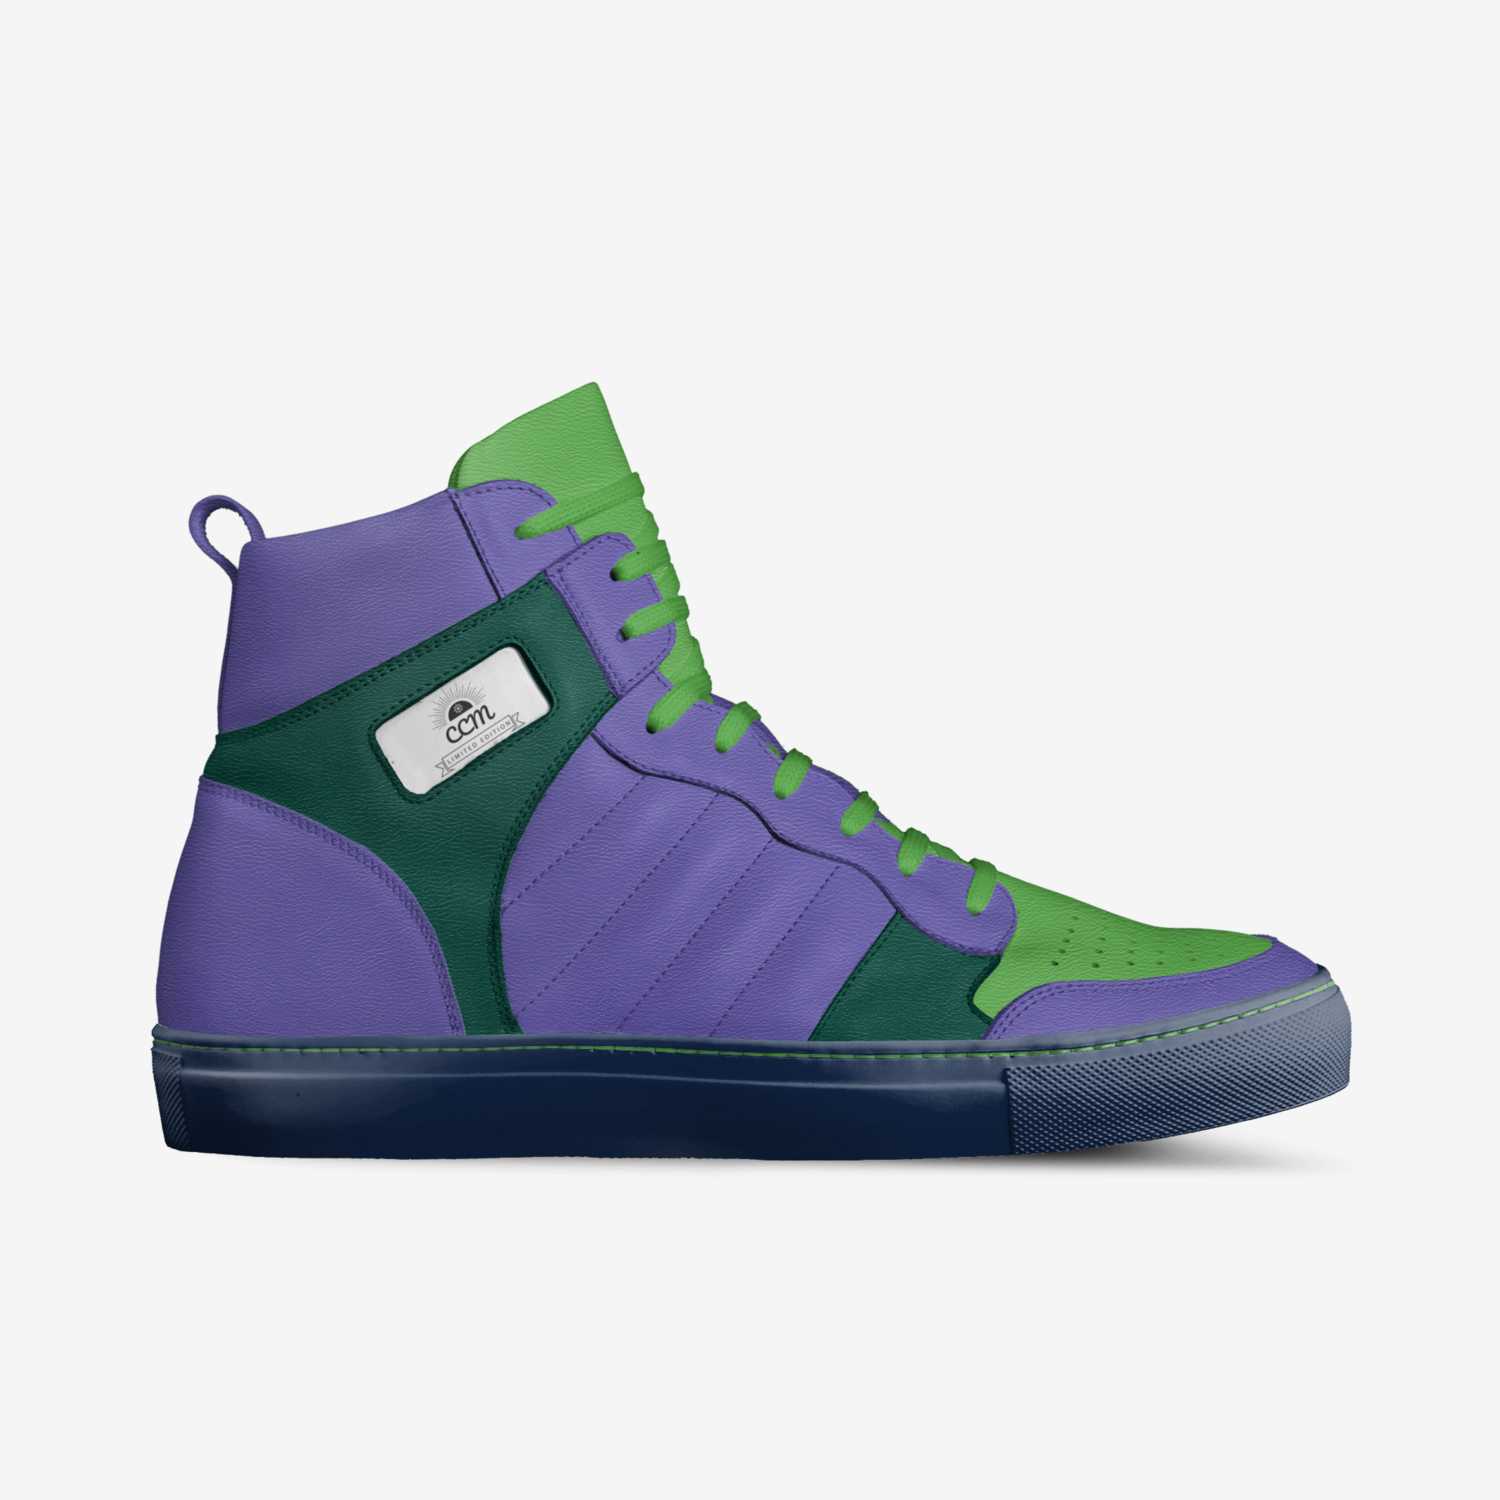 CCM | A Custom Shoe concept by Cammy